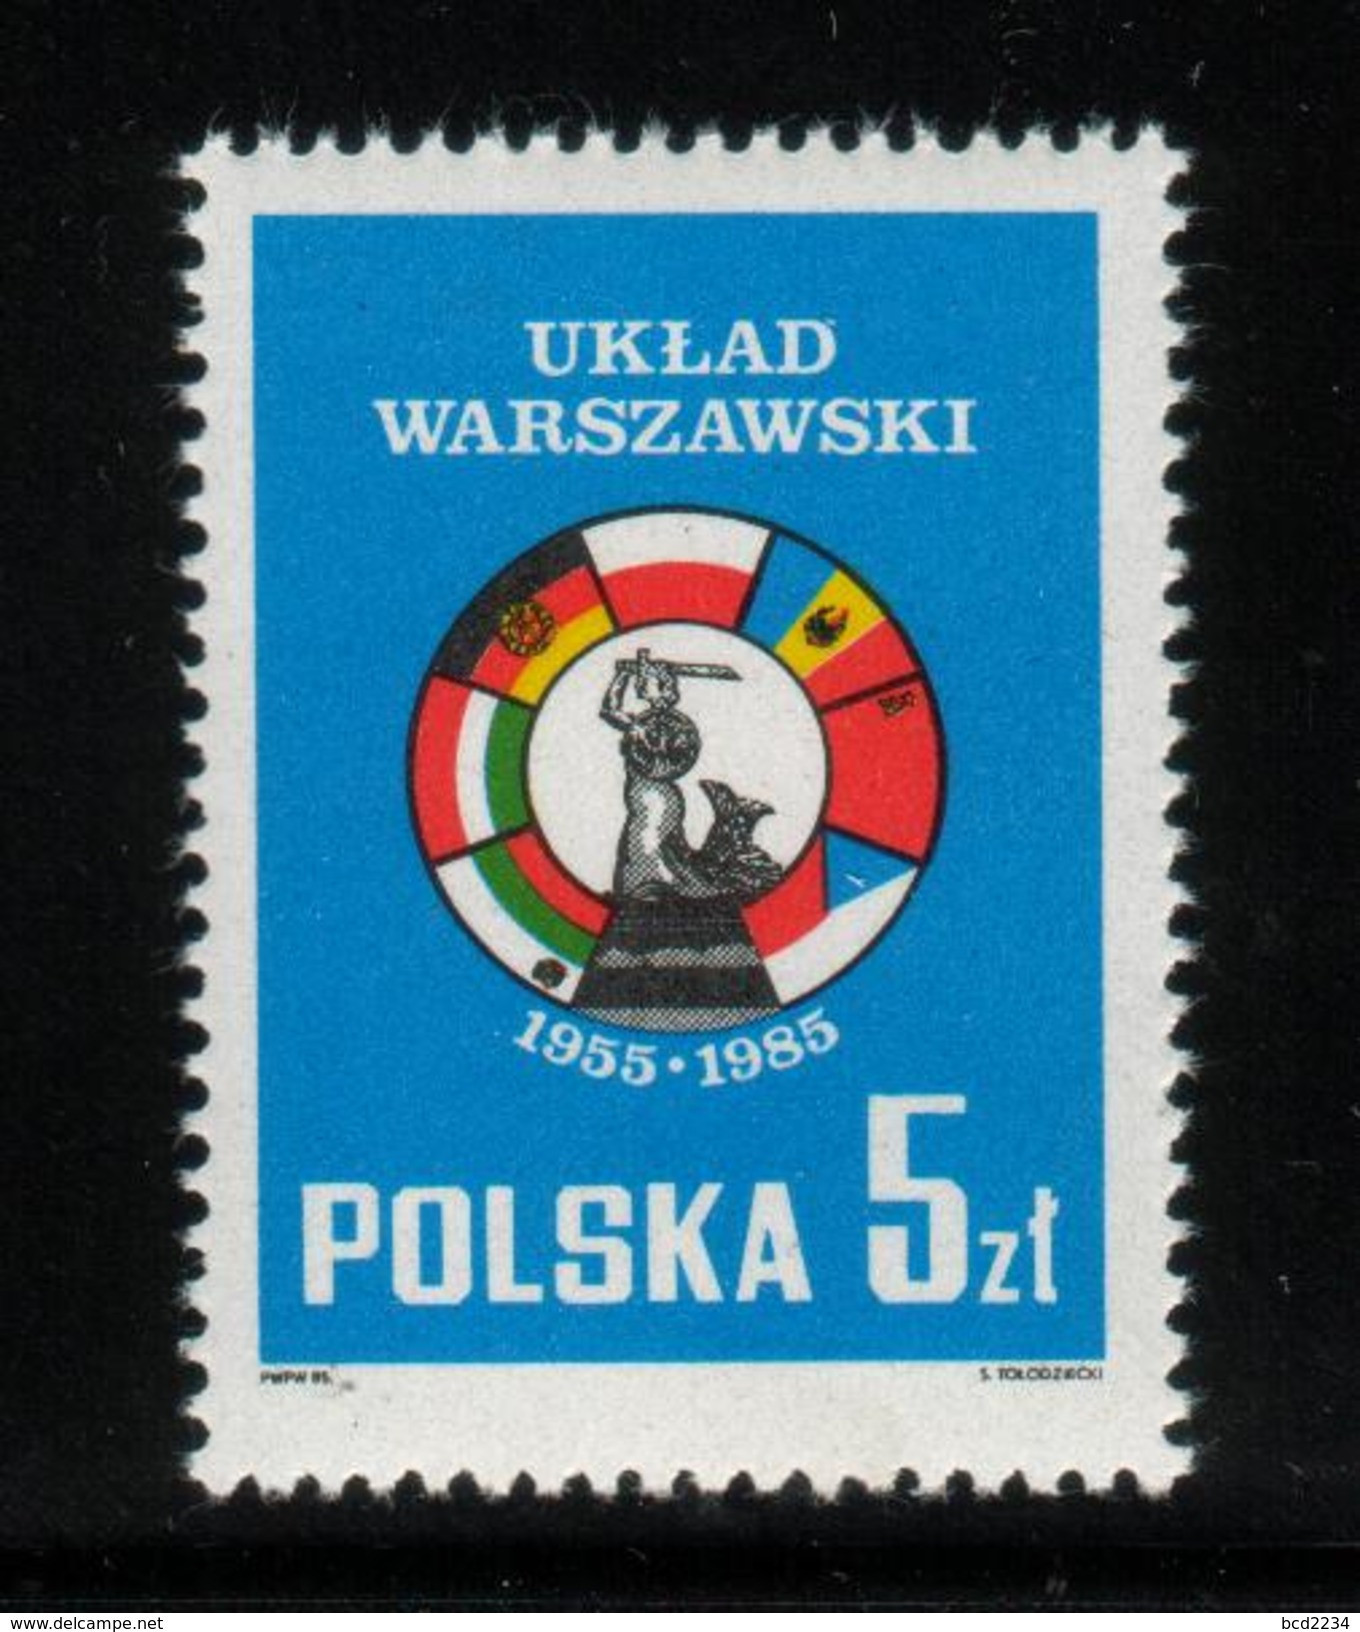 POLAND 1985 30TH ANNIVERSARY OF THE WARSAW PACT 1955-1985 NHM Mermaid Of Warszawa Flags - Unused Stamps